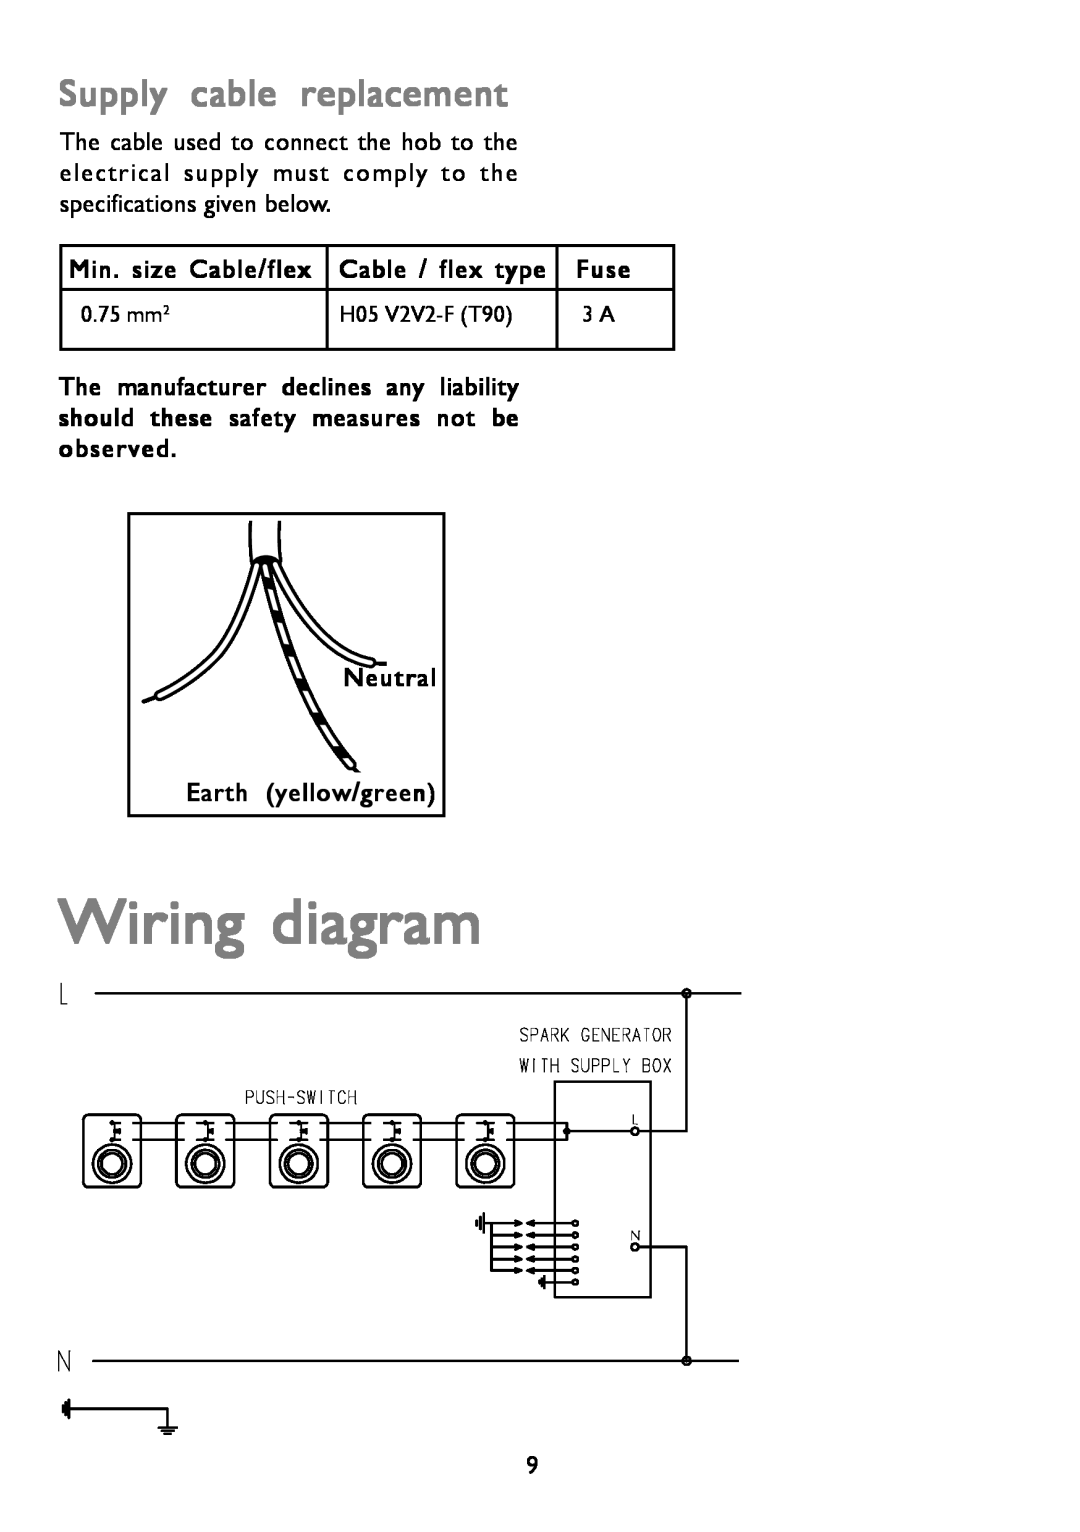 John Lewis JLBIGH753 instruction manual Wiring diagram, Supply cable replacement 